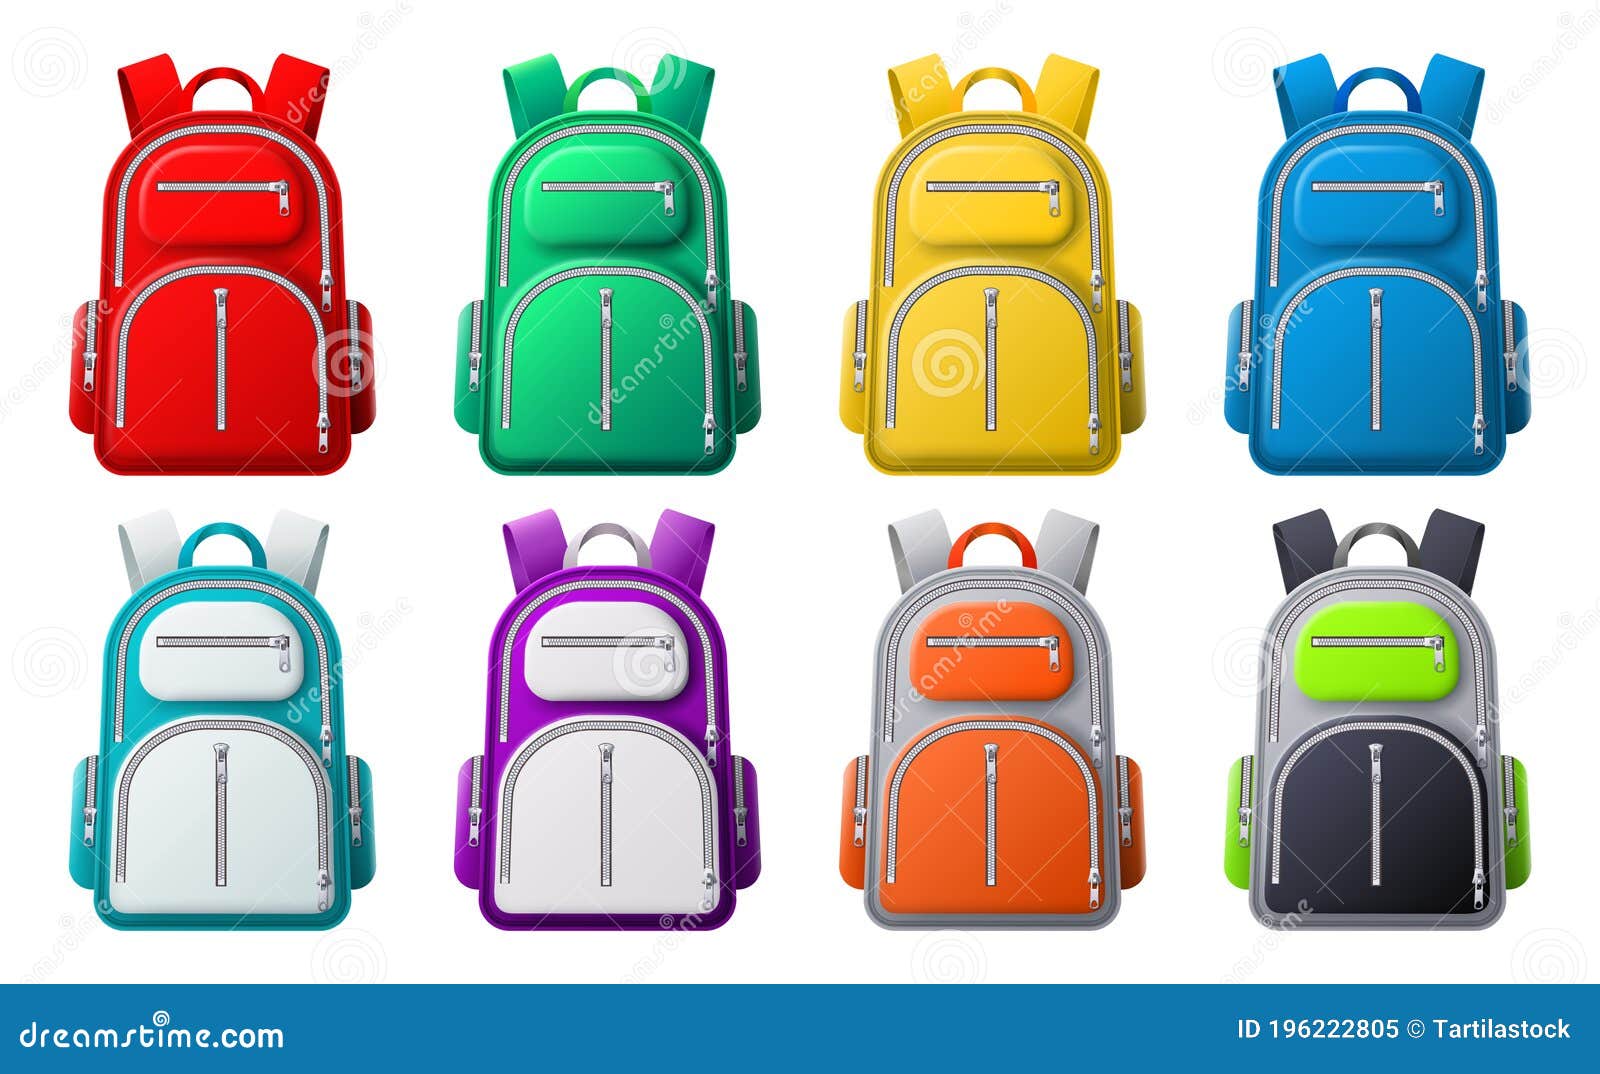 Download Color Sport Backpack Mockup Different Colored Backpacks Bags For Travel Sport Or School Clothes And Shoes Realistic Stock Vector Illustration Of Rucksack College 196222805